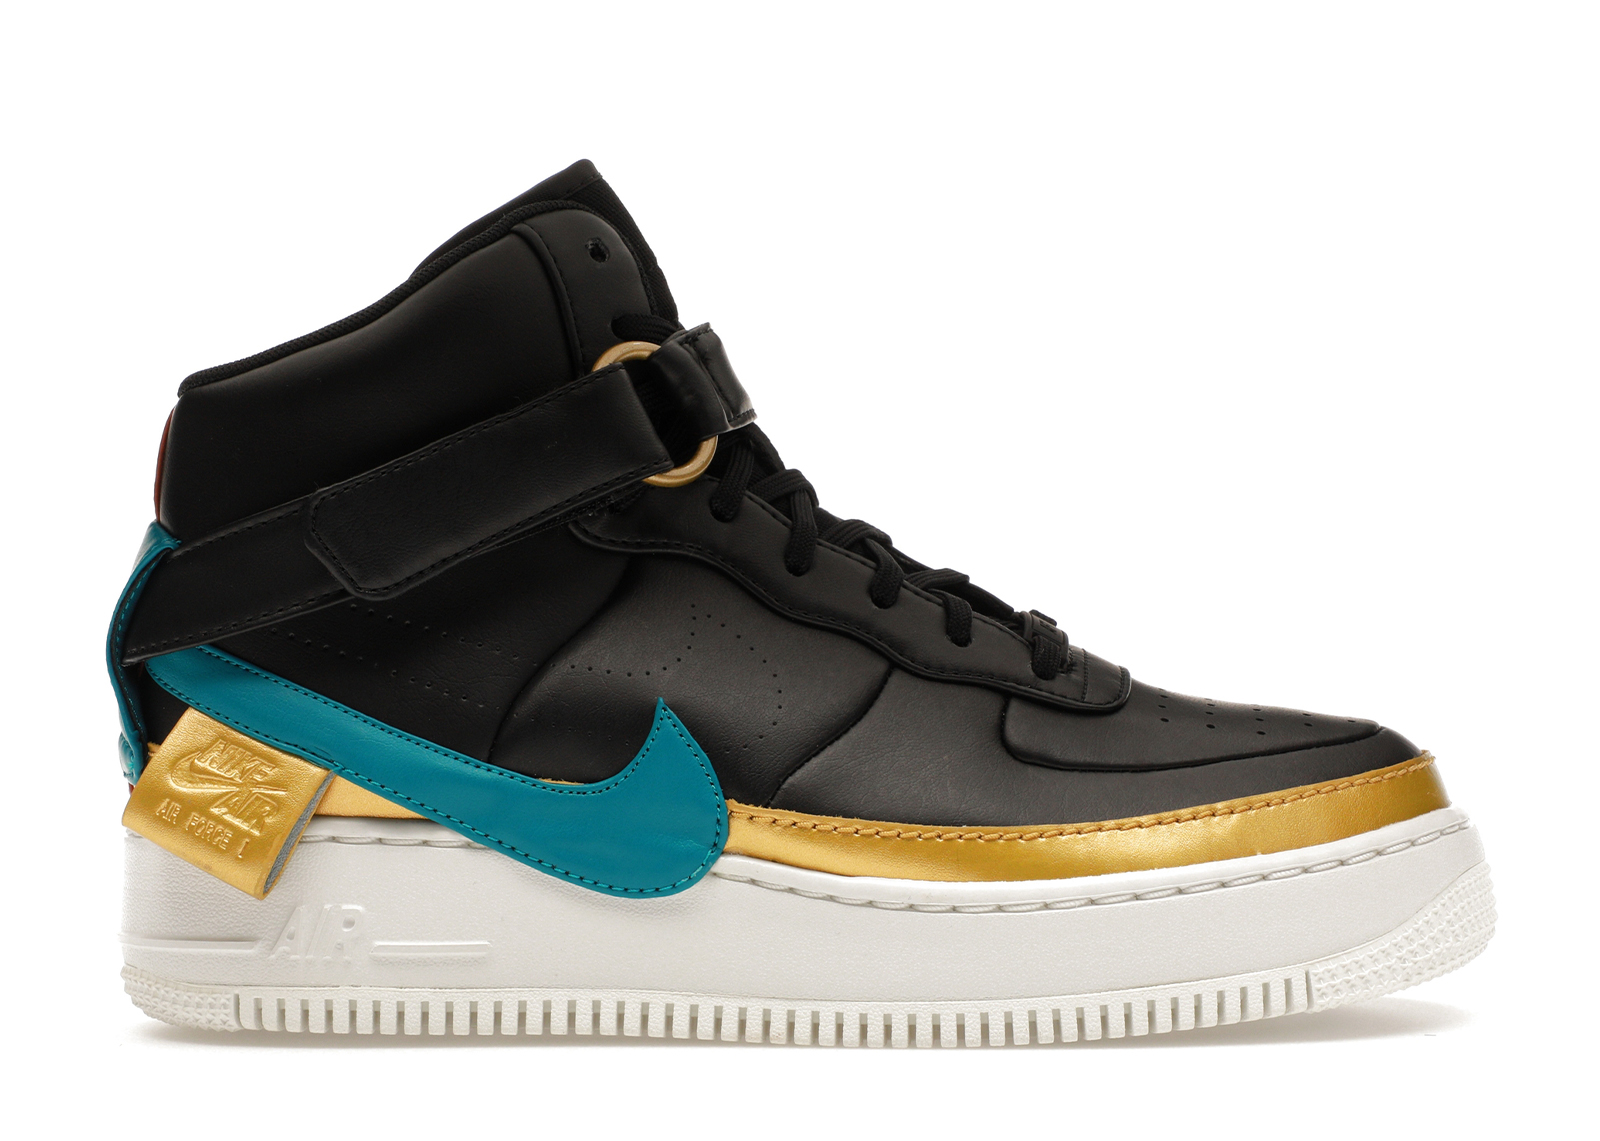 Nike Air Force 1 High Jester XX Black Blustery (Women's)